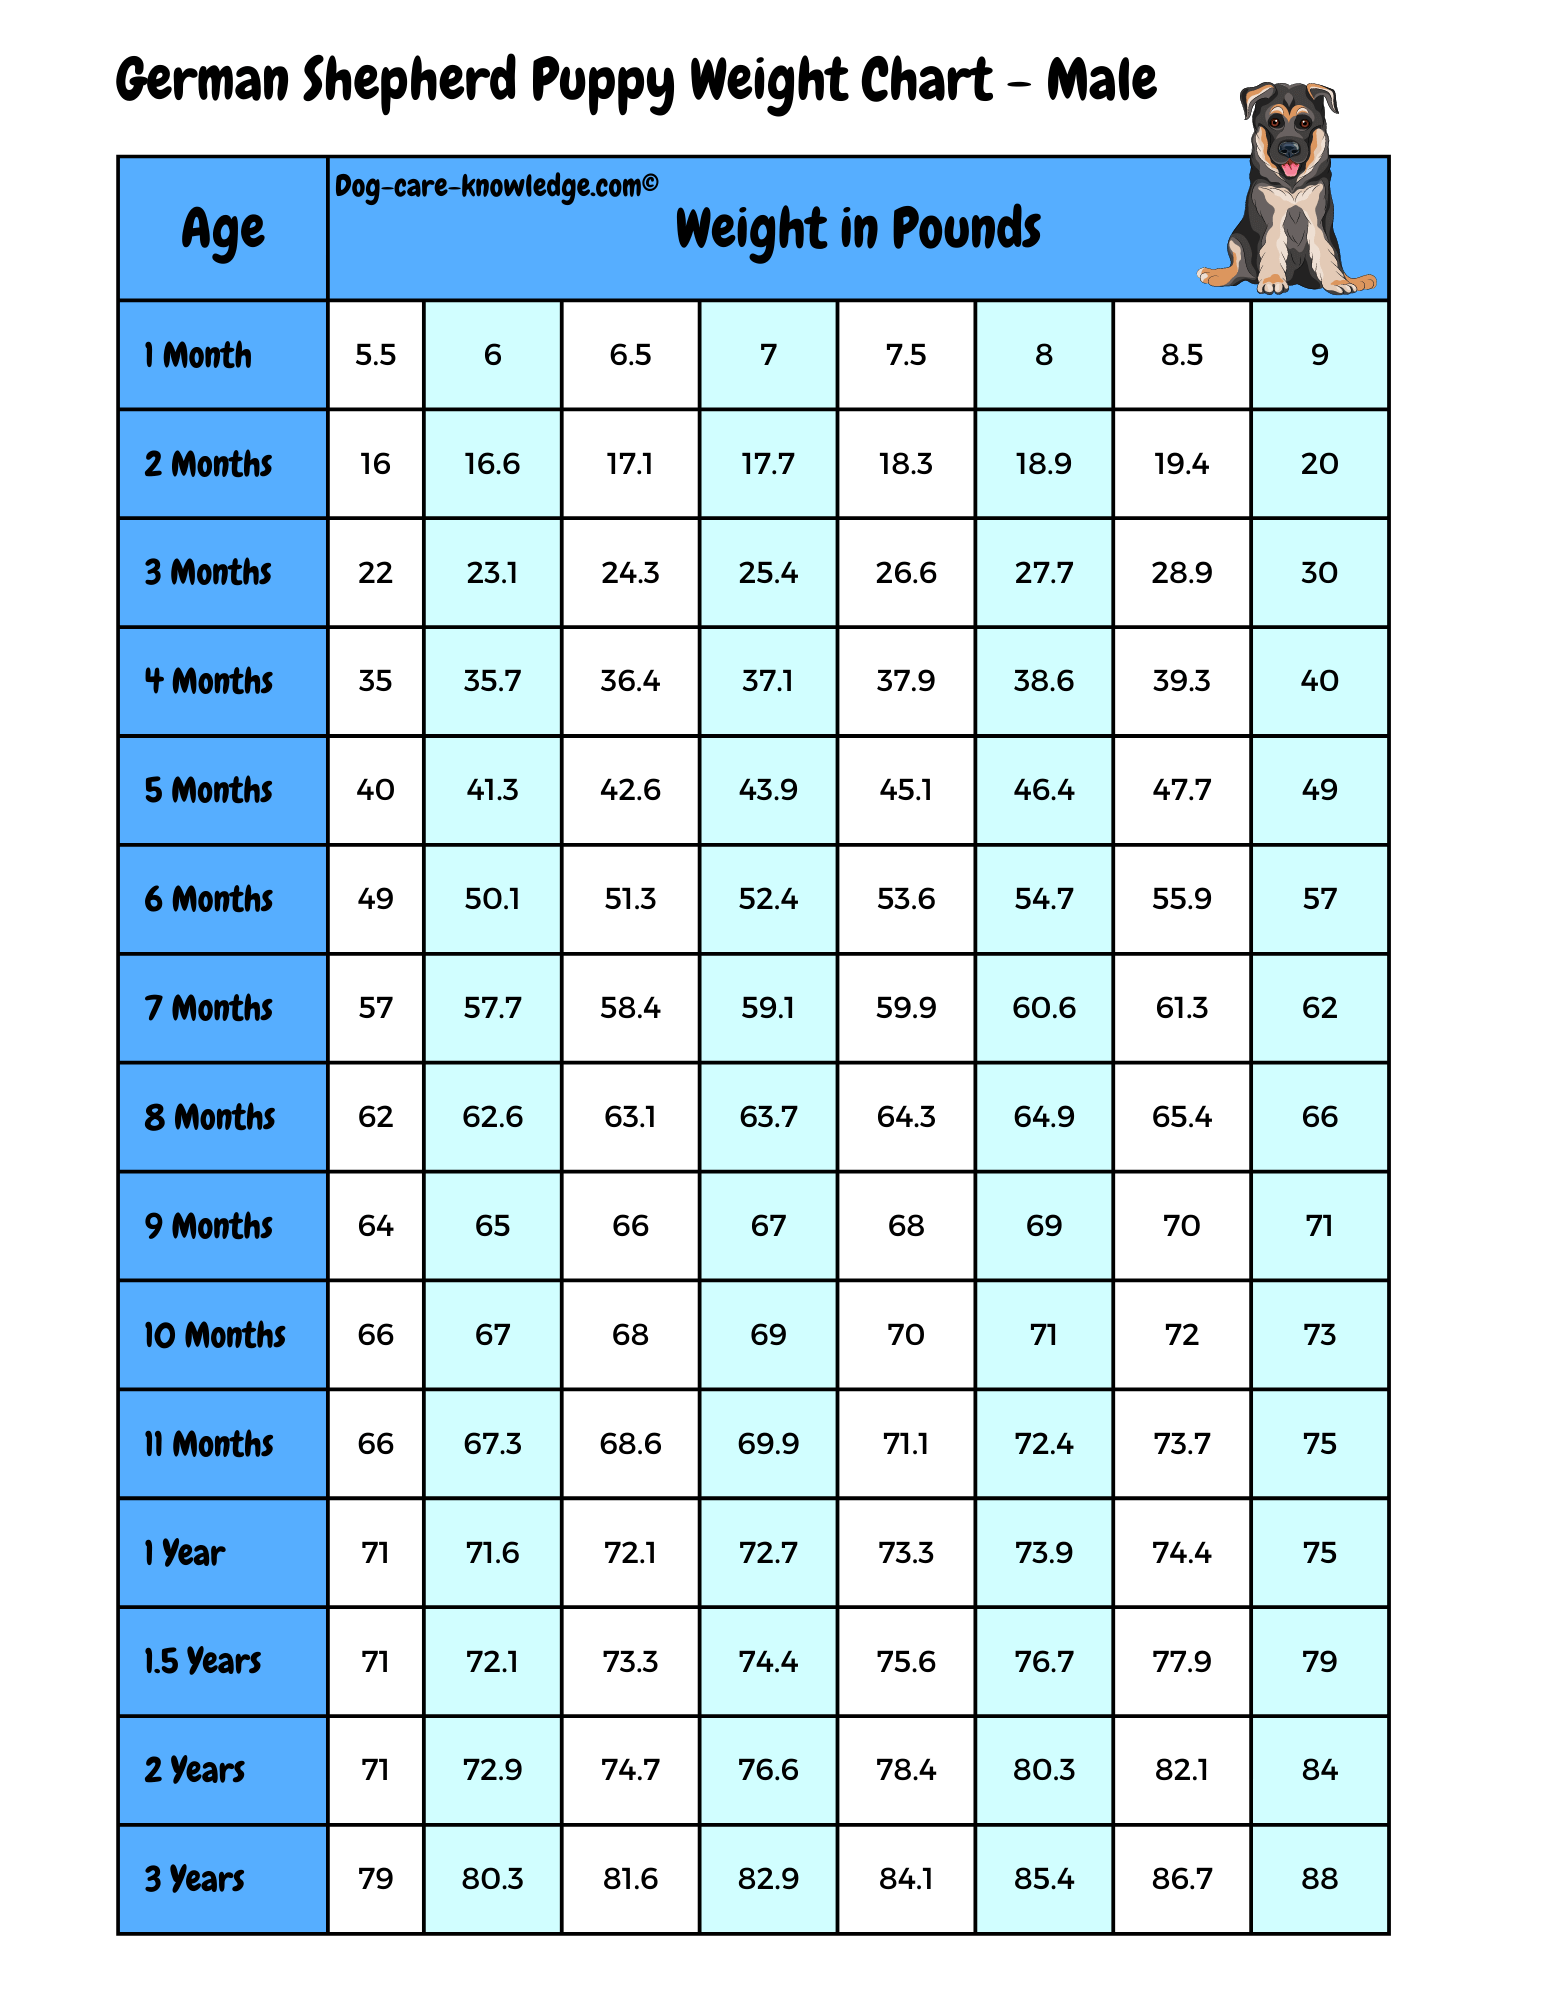 https://www.dog-care-knowledge.com/images/img-GSD-puppy-weight-chart-male-c.png